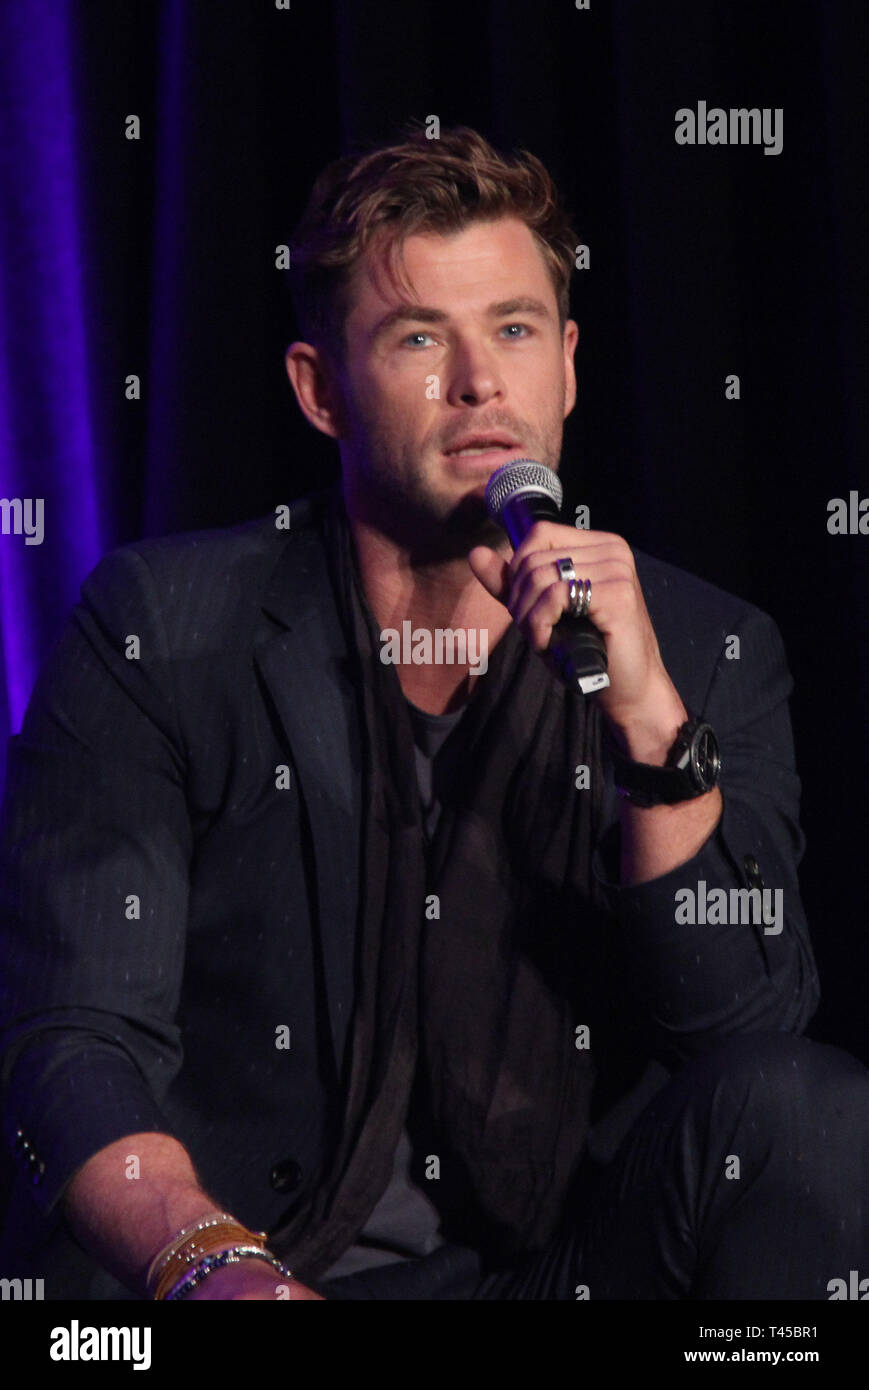 Chris Hemsworth  04/07/2018 "Avengers: Endgame" Press Conference held at The InterContinental Los Angeles Downtown in Los Angeles, CA   Photo: Cronos/Hollywood News Stock Photo